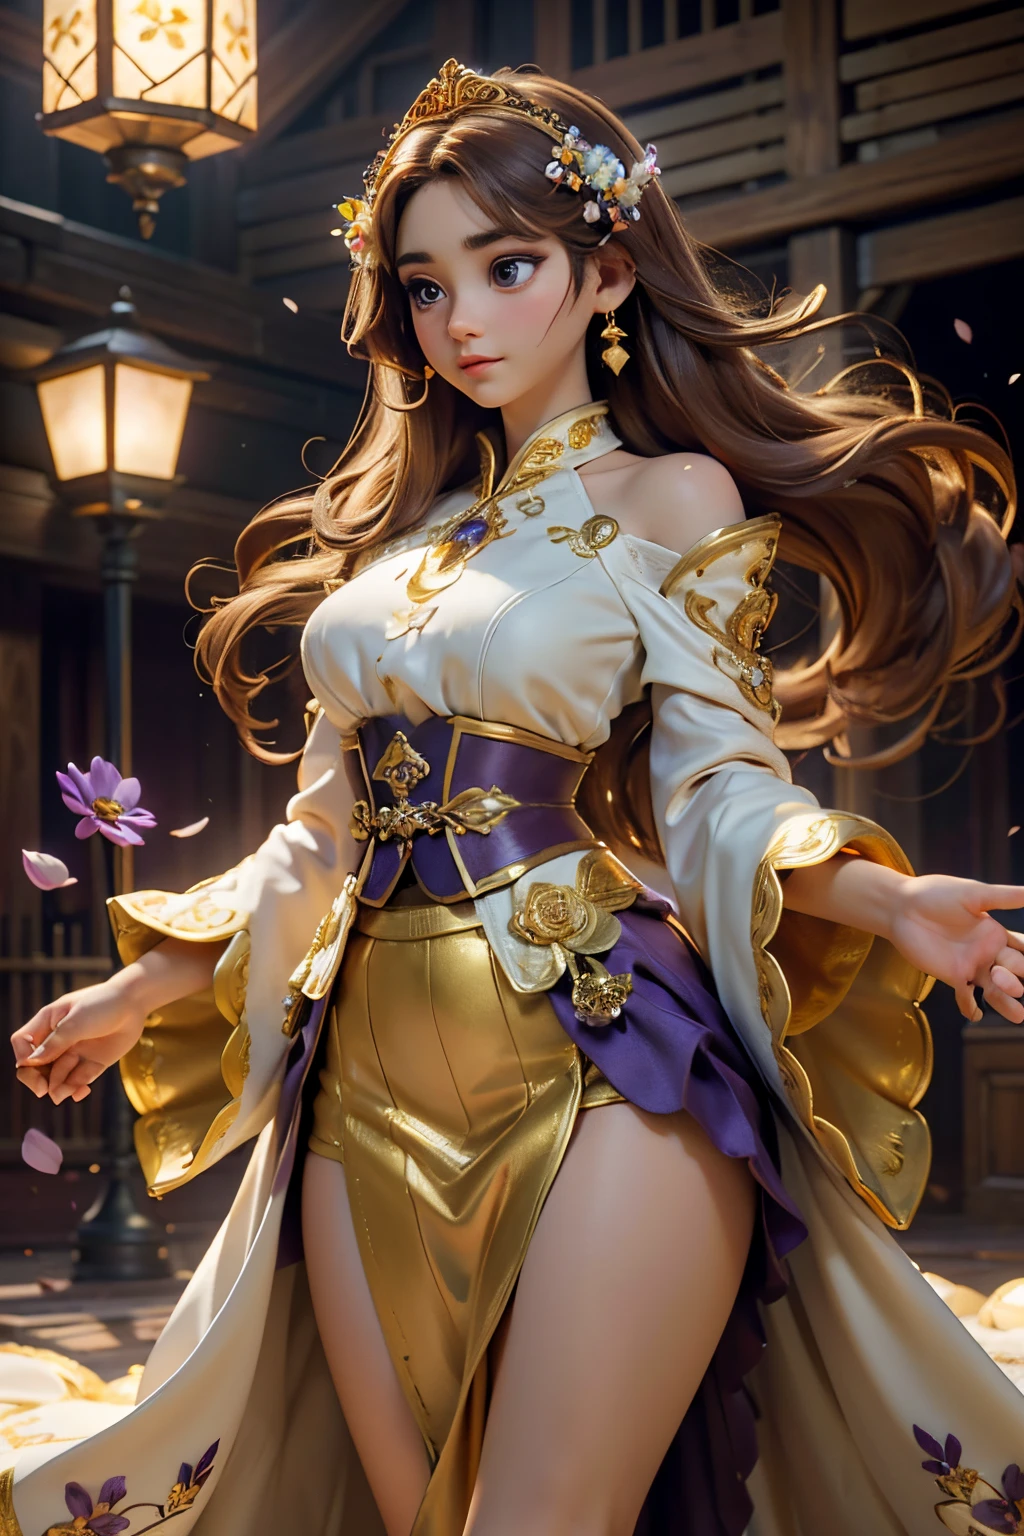 Superb Quality, Masterpiece, High Resolution, (Exquisite Body: 1.5), Stunning Beauty, (Milky Skin: 1.3), Exquisite Details, High Resolution, Wallpaper, 1 Woman, Solo, Dress, Hair Accessories, (((Golden Purple Skirt)) ), Flower, Long Hair, Brown Hair, Shut Up, Accessories, Long Sleeves, Raised Hand, Wide Sleeves, Big Eyes, Flowing Hair, Hanfu, Hanfu, Embroidery, Long Skirt, Natural Pose, Falling Petals, Indoor, Fanning, Lantern, 16K, HDR, High Resolution, Depth of Field, (Film Grae: 1.1), Bocon, Primetime, (Lens Glow), Vignette, Rainbow, (Color Grading: 1.5)